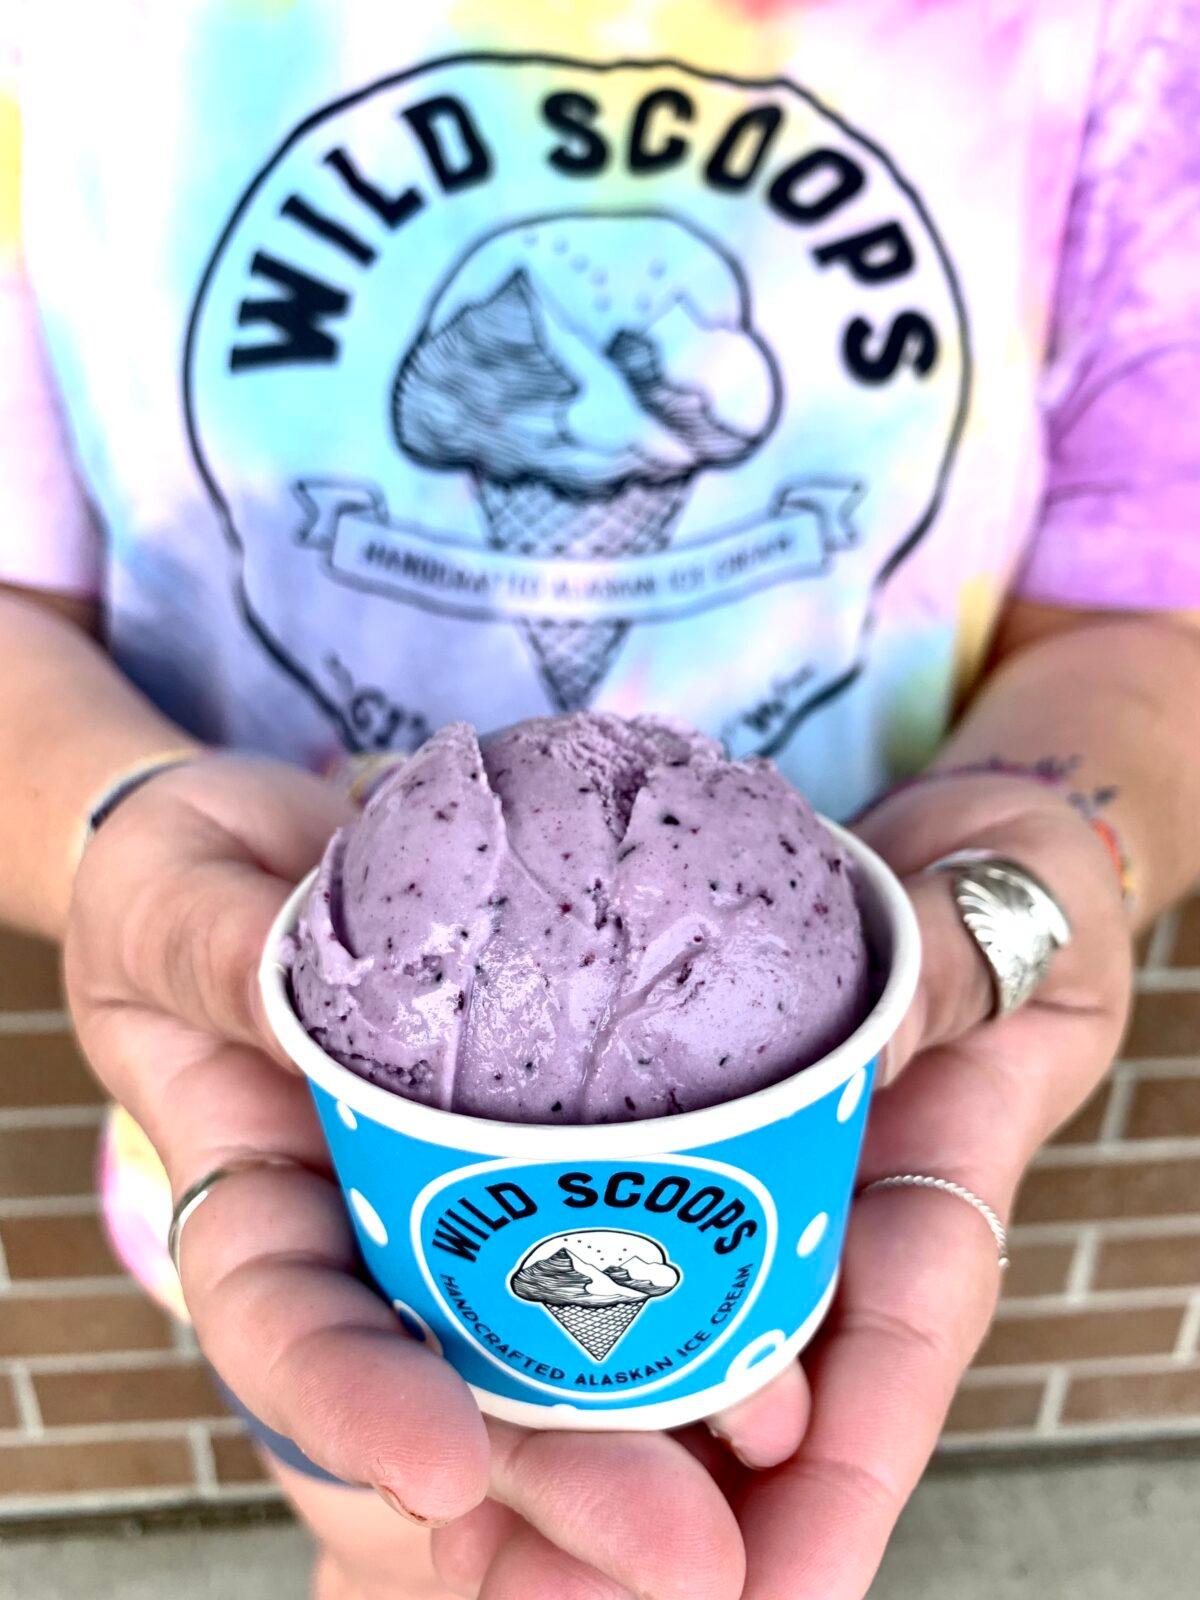 Wild blueberry ice cream at Wild Scoops in Anchorage, Alaska. (Courtesy of Wild Scoops)